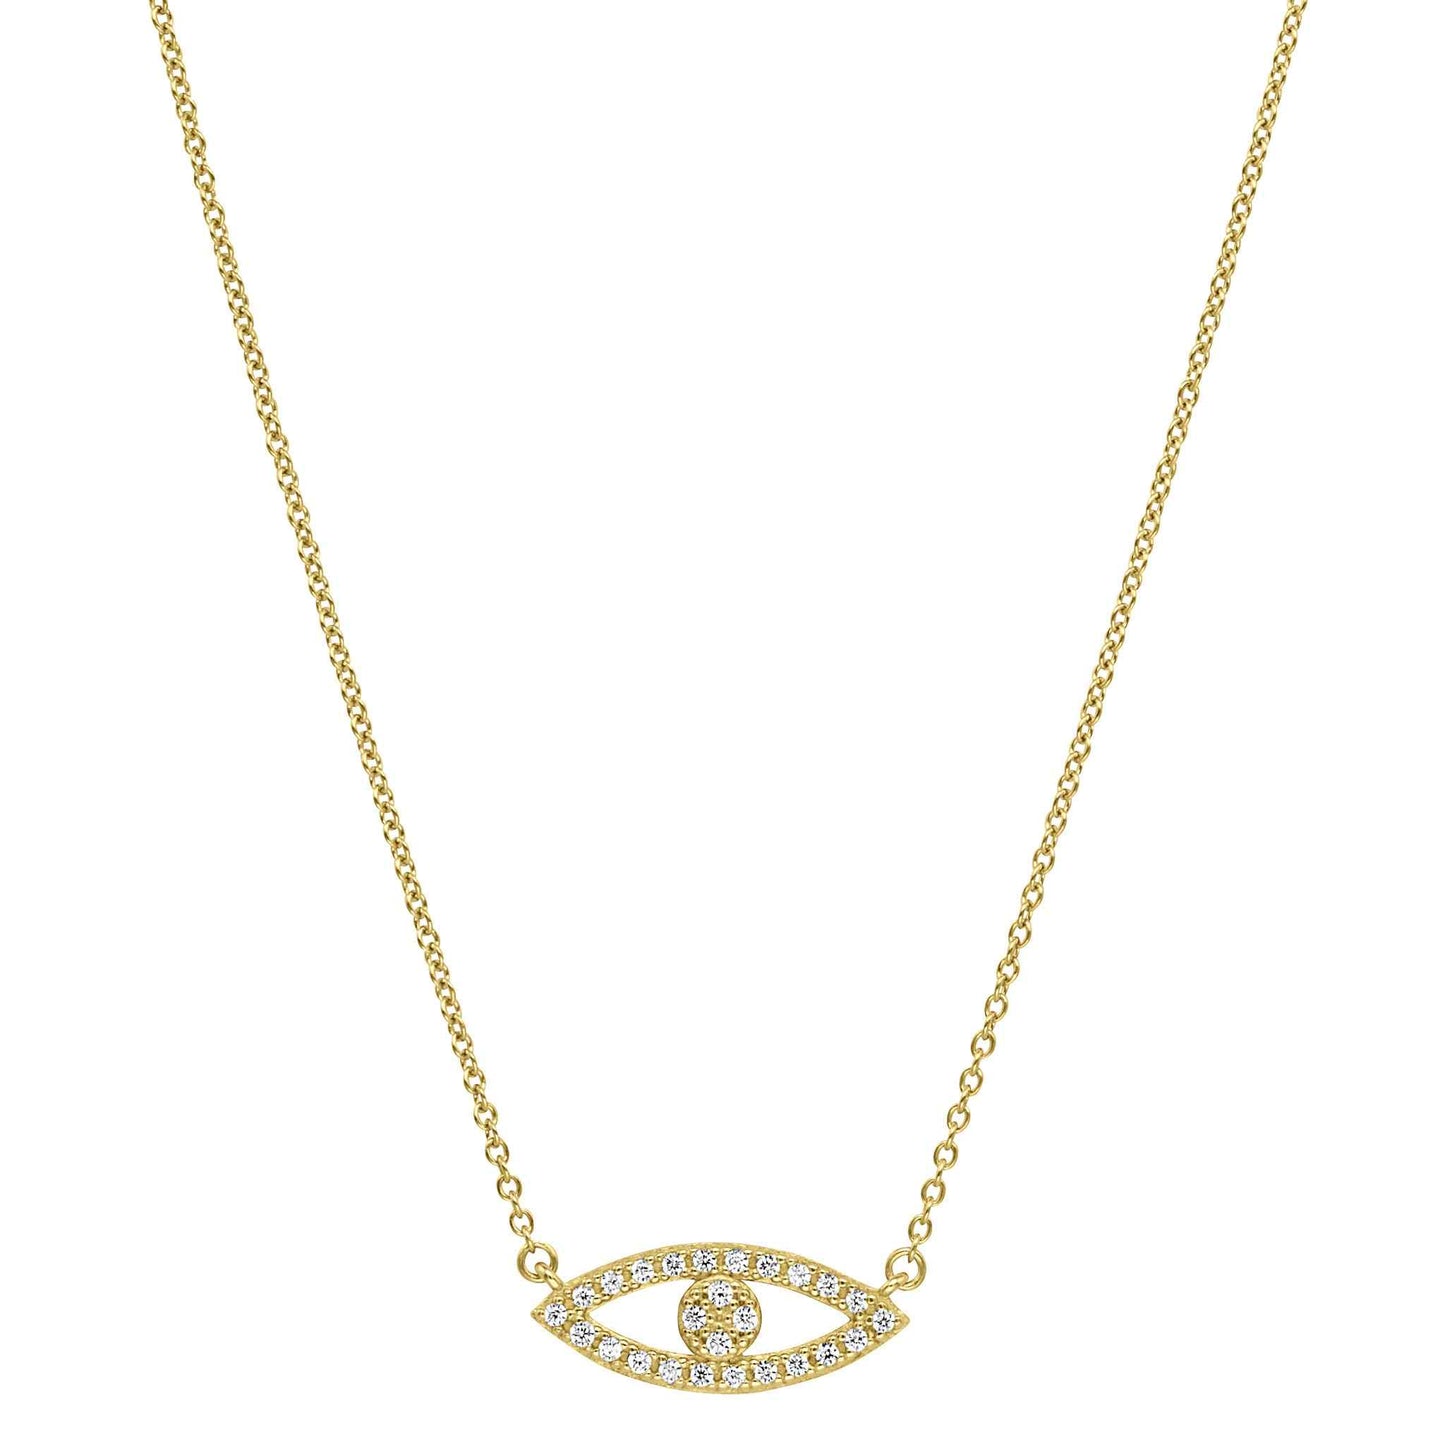 A evil eye necklace with simulated diamonds displayed on a neutral white background.